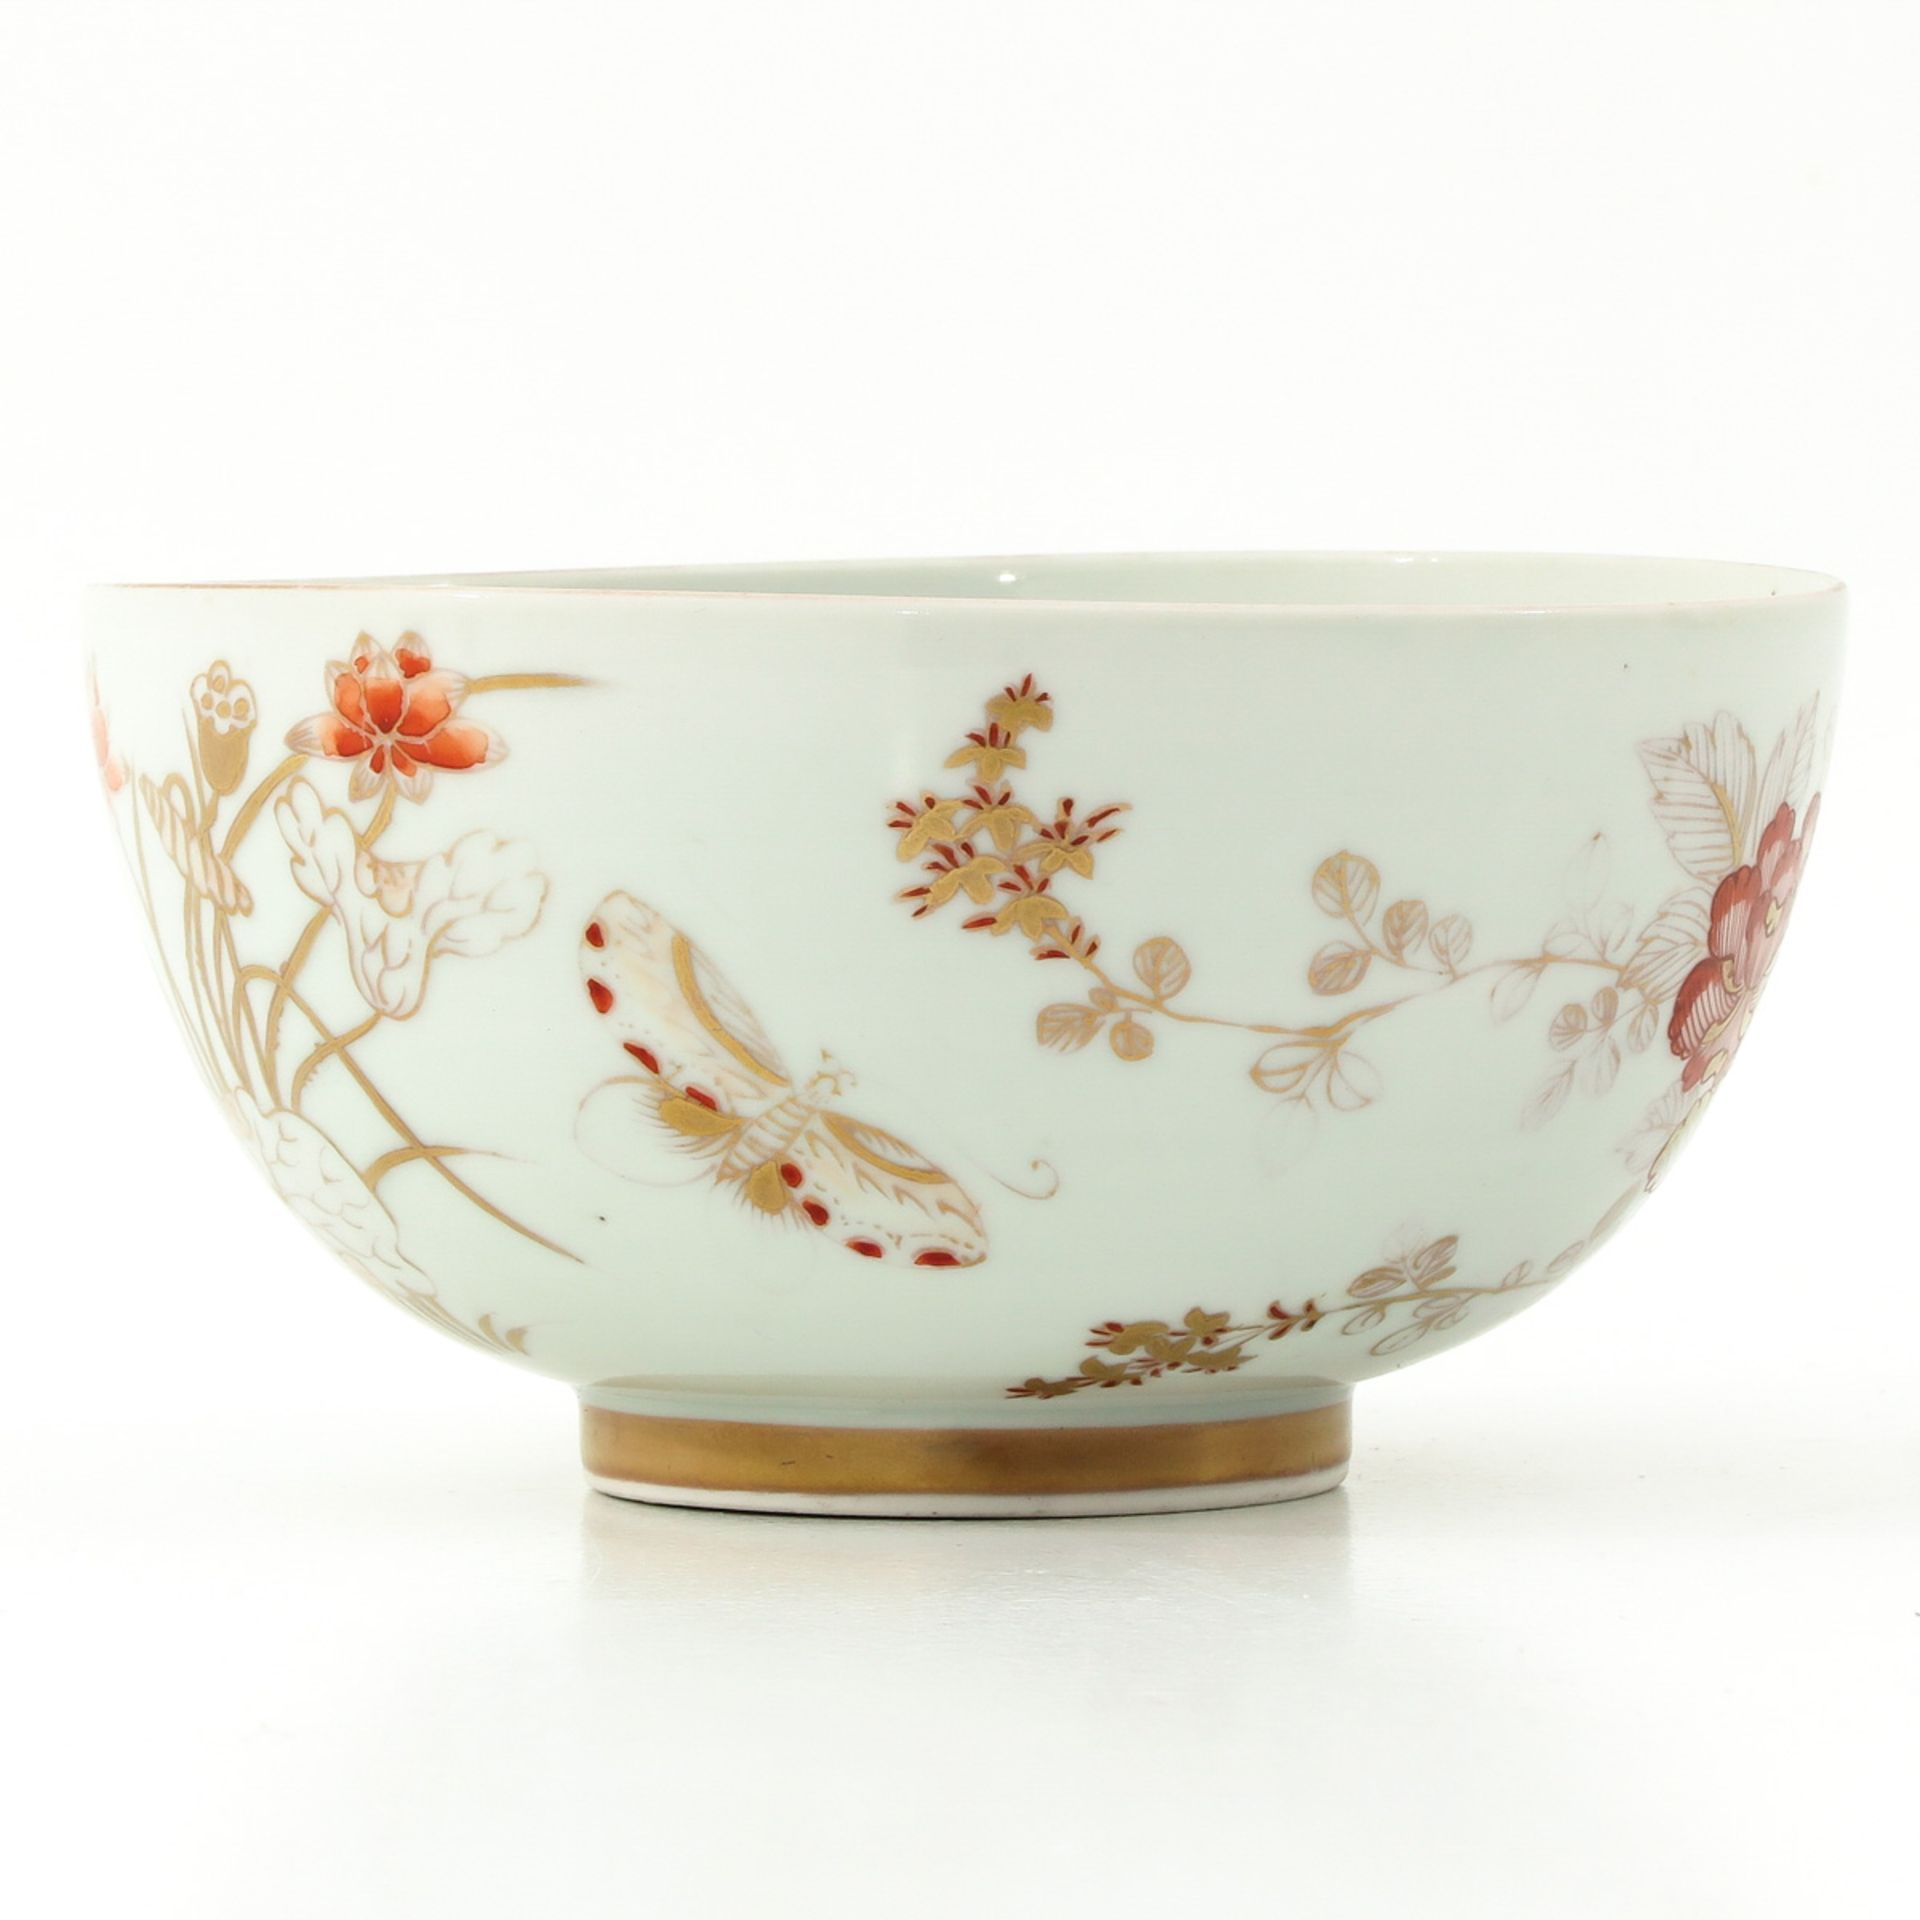 A Milk and Blood Decor Bowl - Image 4 of 9